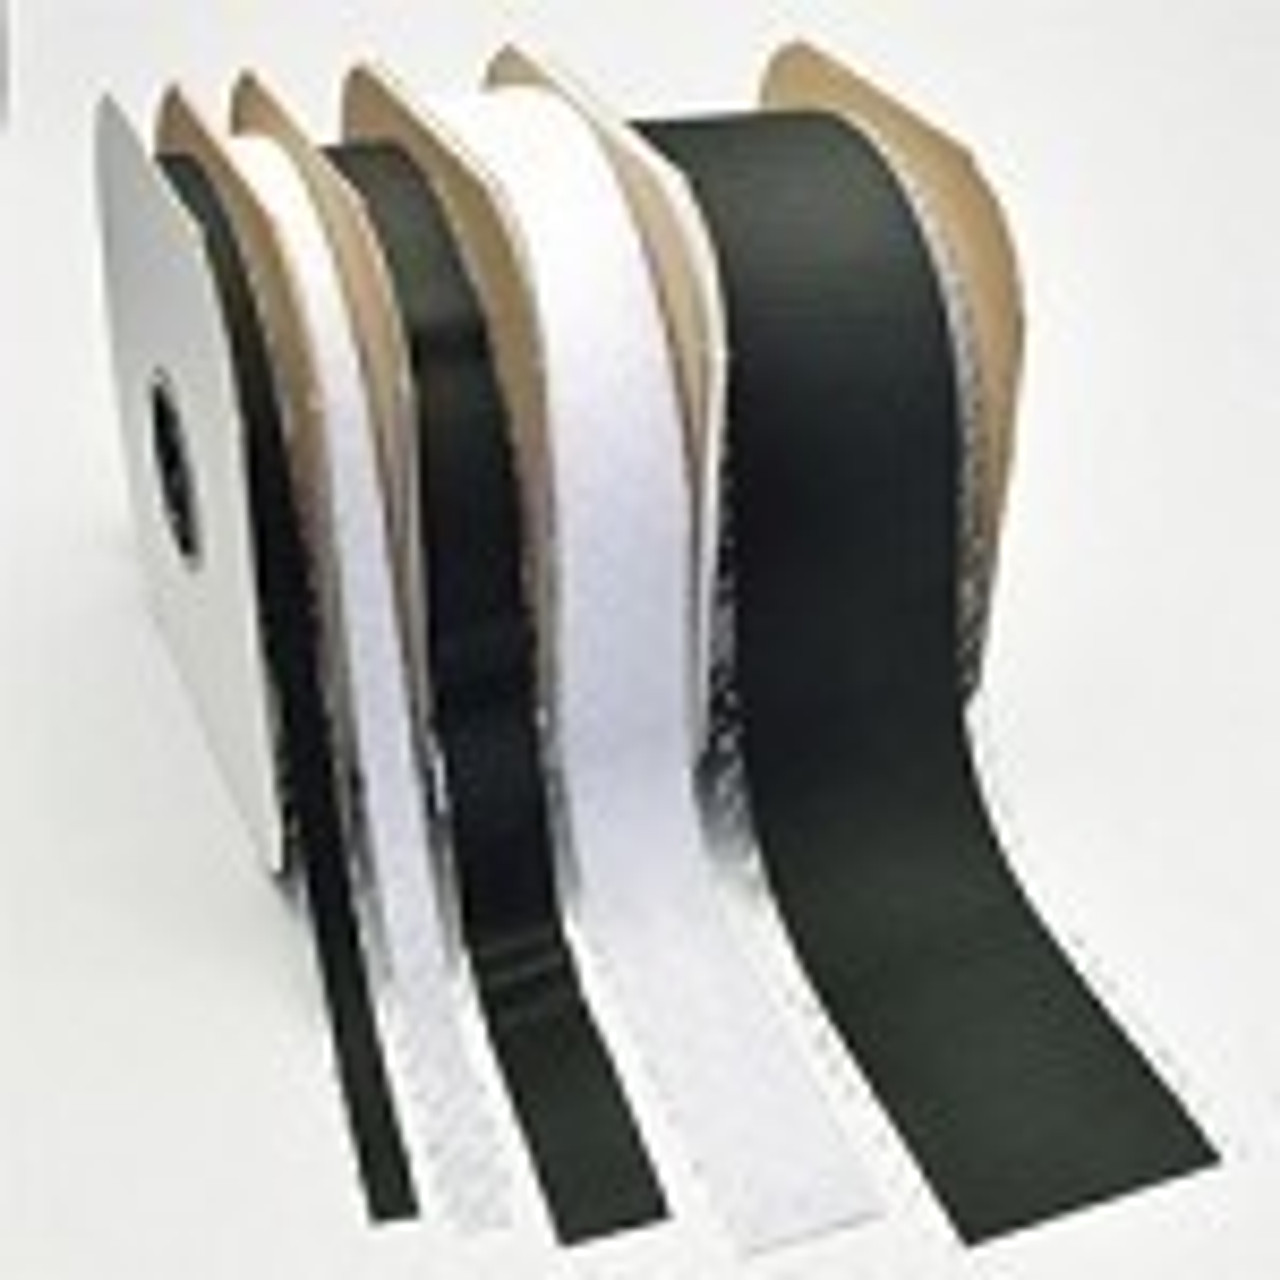 VELCRO® Brand HOOK Sheet 12 Wide Industrial Adhesive Backed - BY THE FOOT